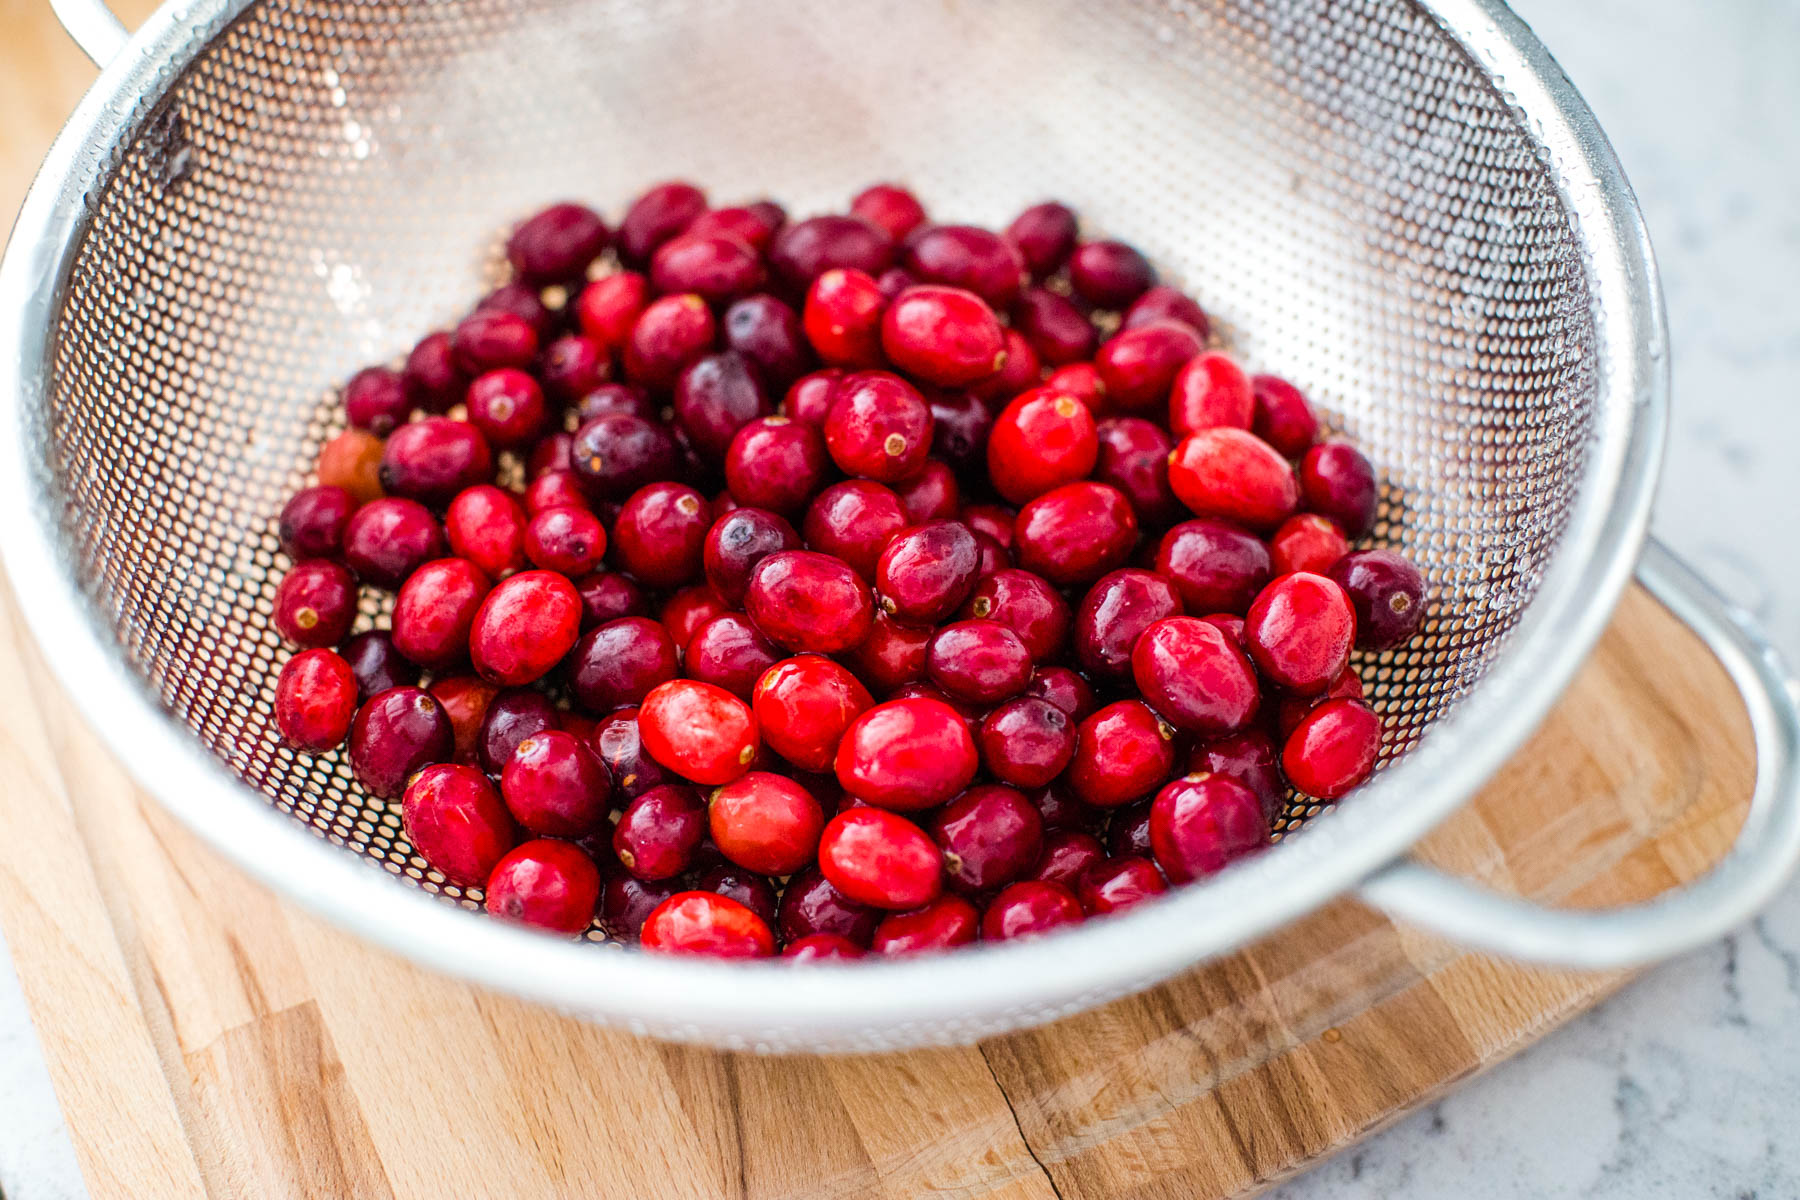 A metal strainer is filled with just-washed fresh cranberries.